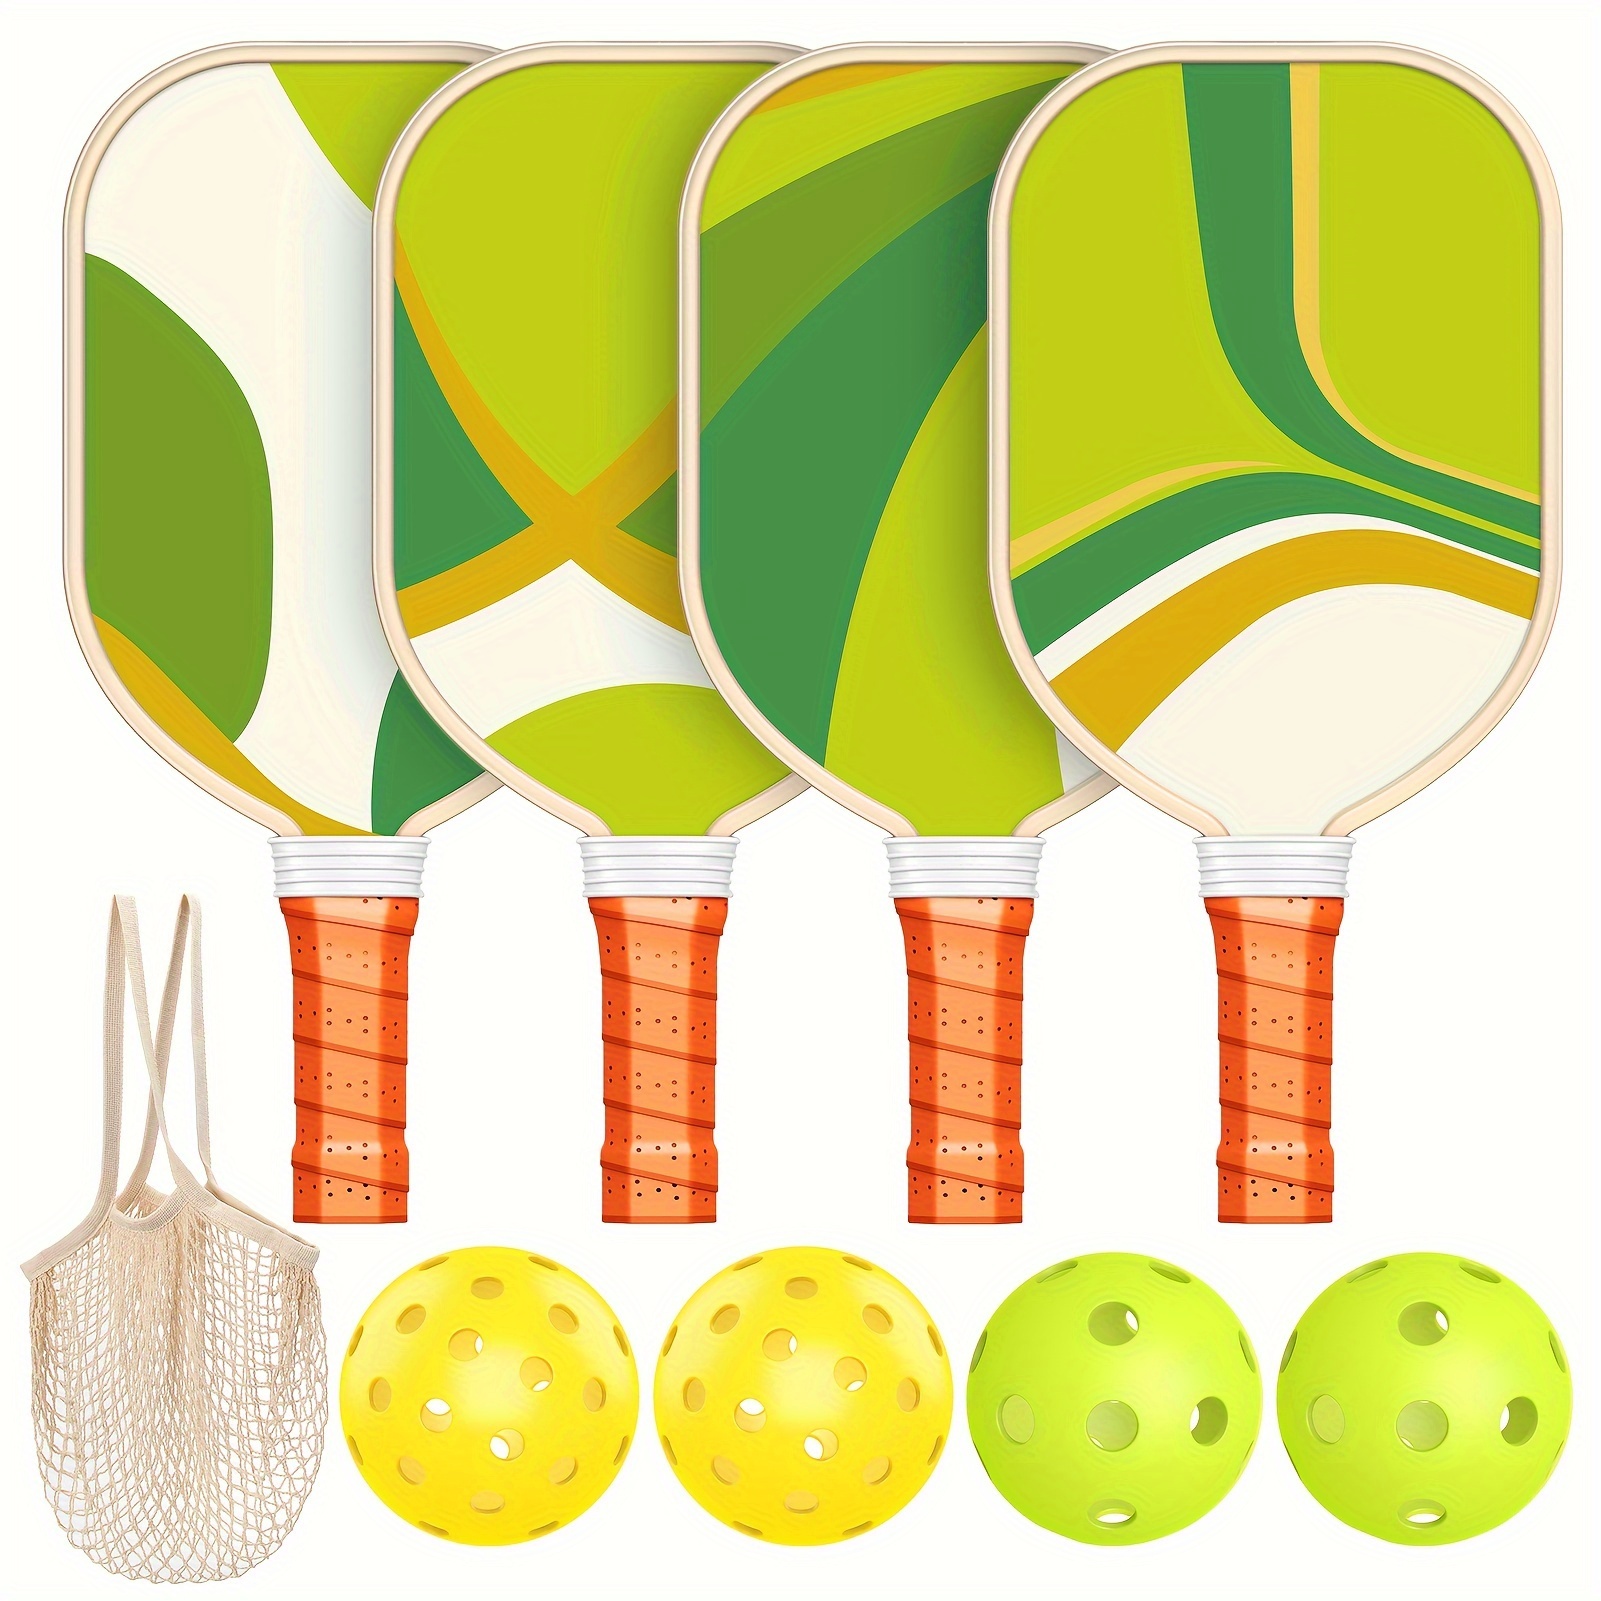 

Pickleball Paddles, Usapa Approved Premium Wood Pickleball Set Of 4 With 4 Pickleball Balls And 1 Carry Bag Pickleball Rackets With Ergonomic Cushion Grip For Beginner & Pros Gifts For Men Women Youth